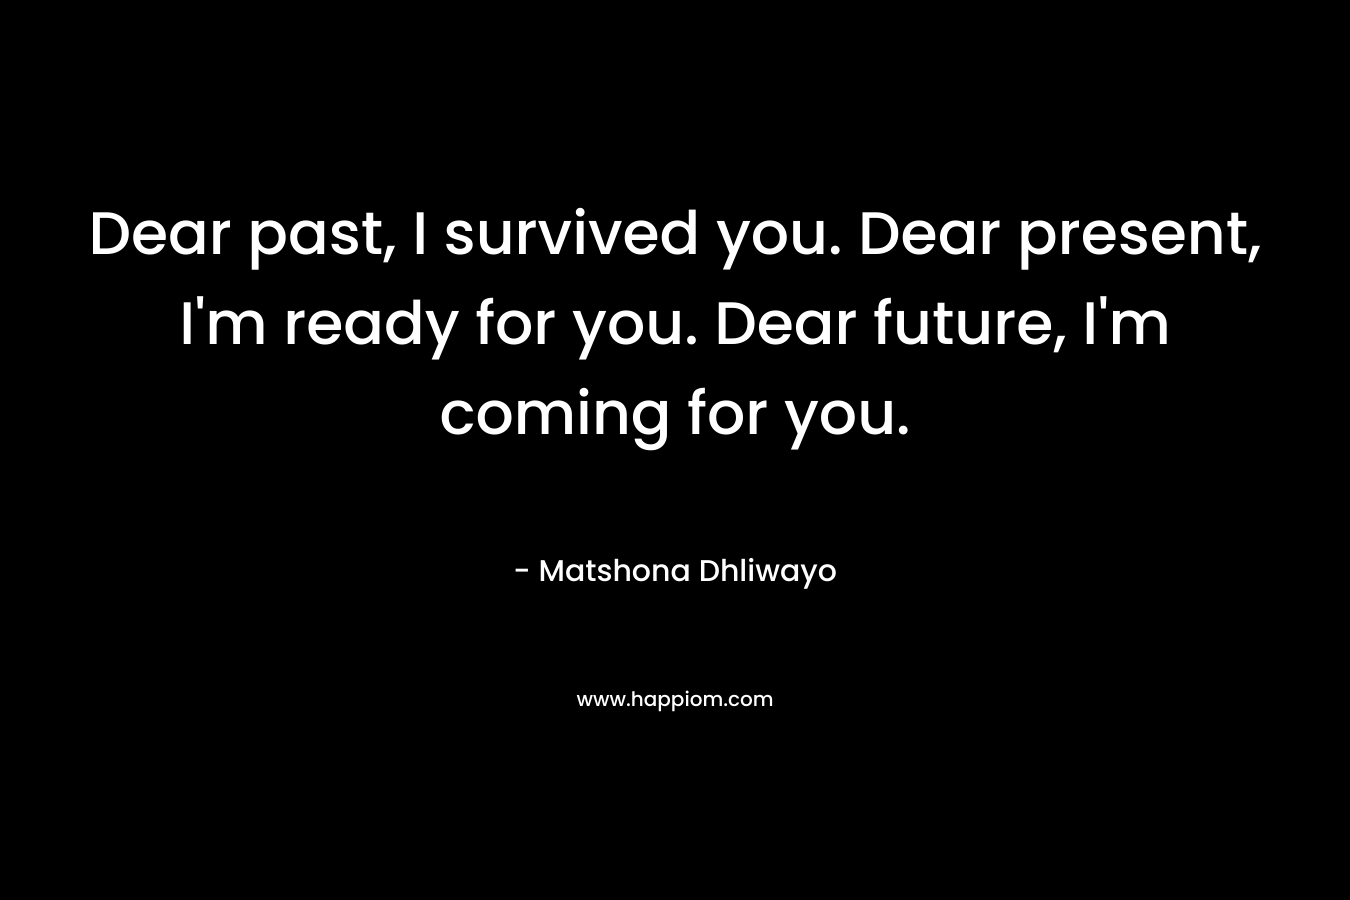 Dear past, I survived you. Dear present, I'm ready for you. Dear future, I'm coming for you.